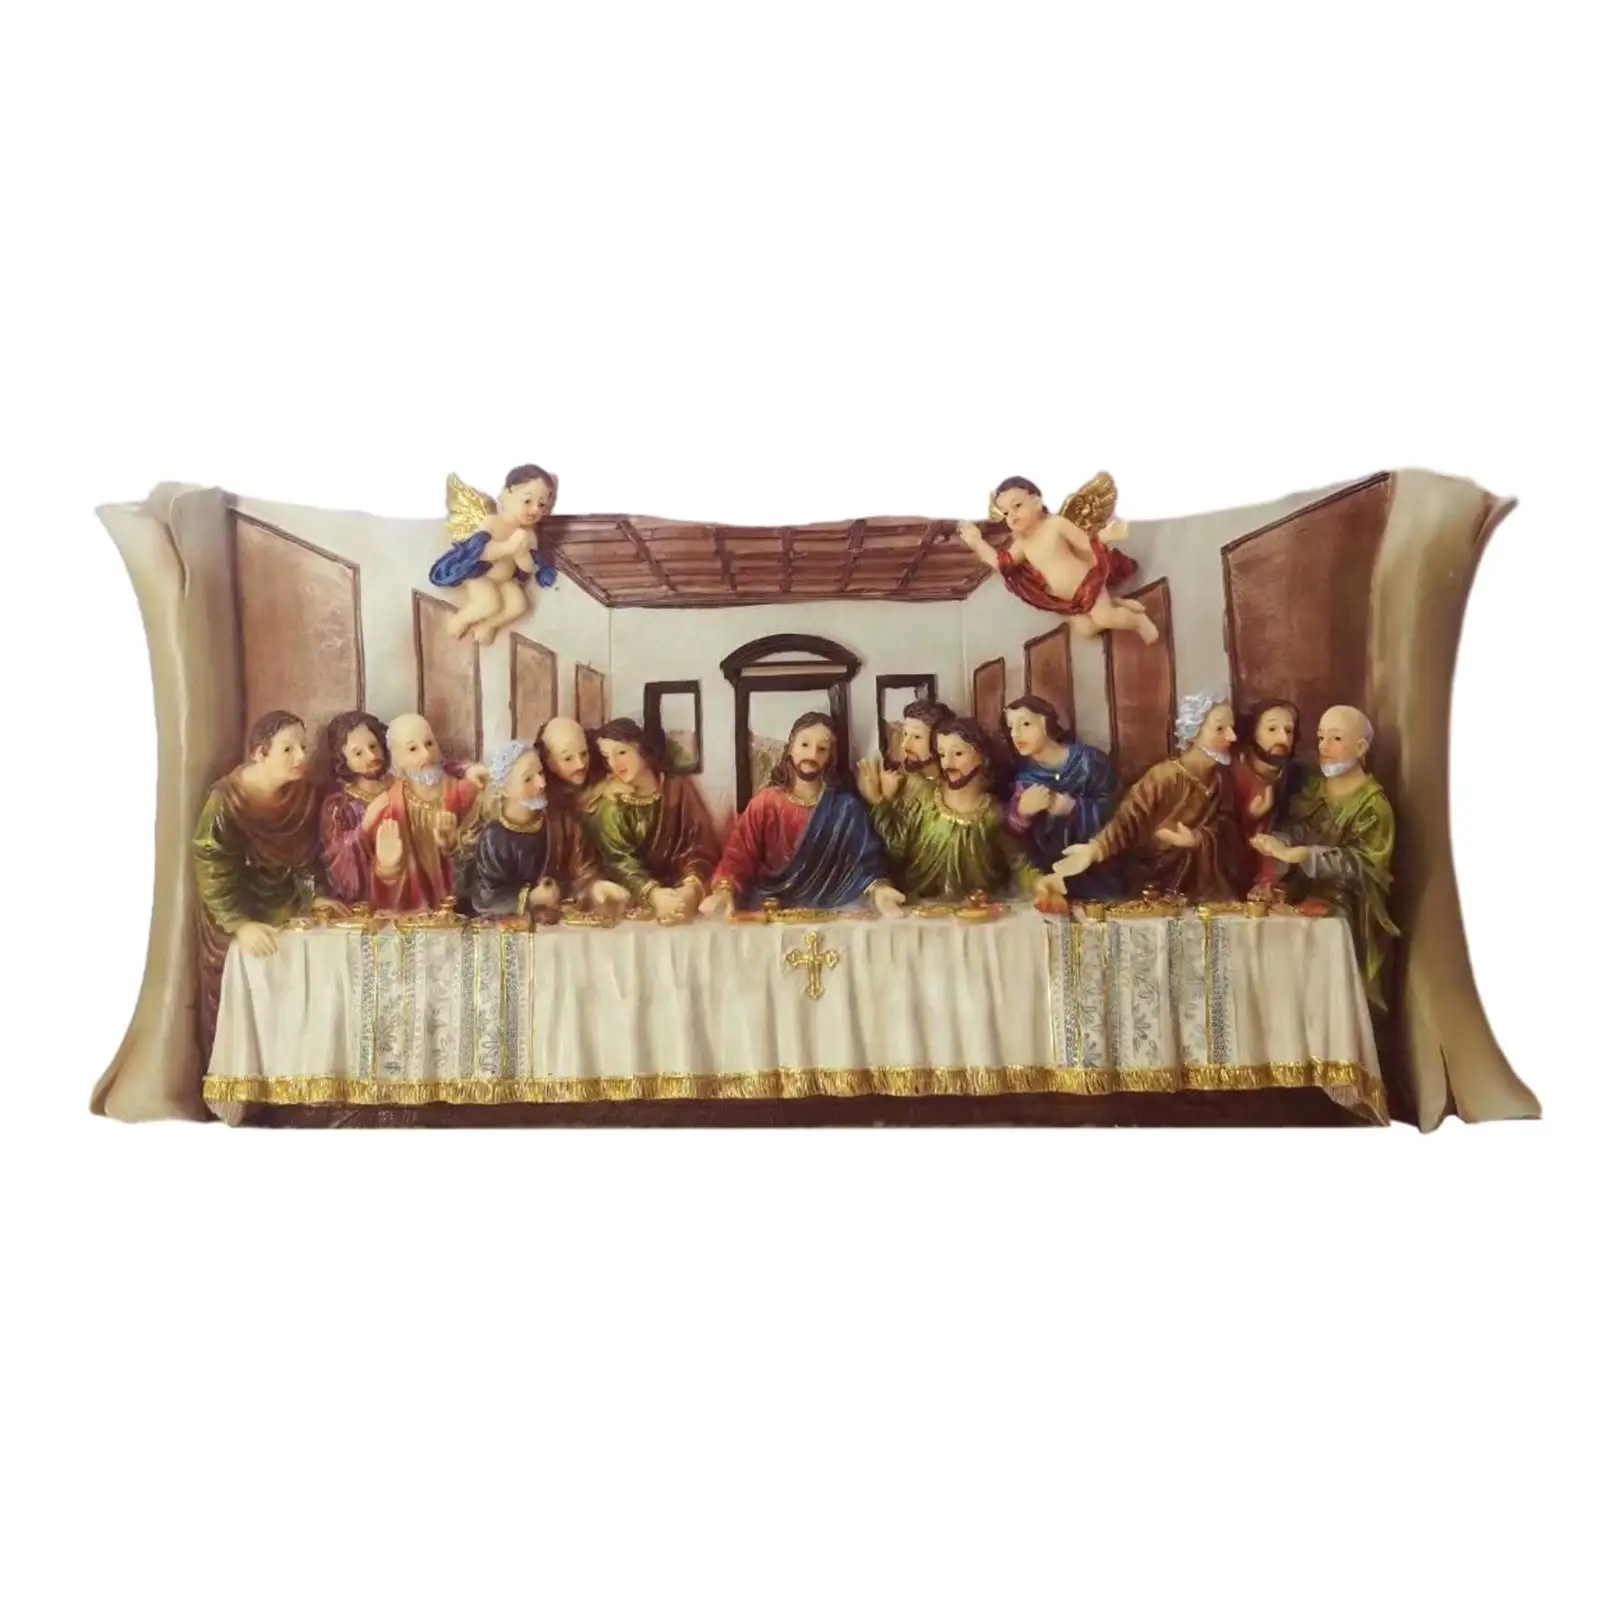 Last Supper Figures Christian Catholic Figurine Religious Statue Sculpture for Home Bedroom Religious Gift Ornaments Decoration